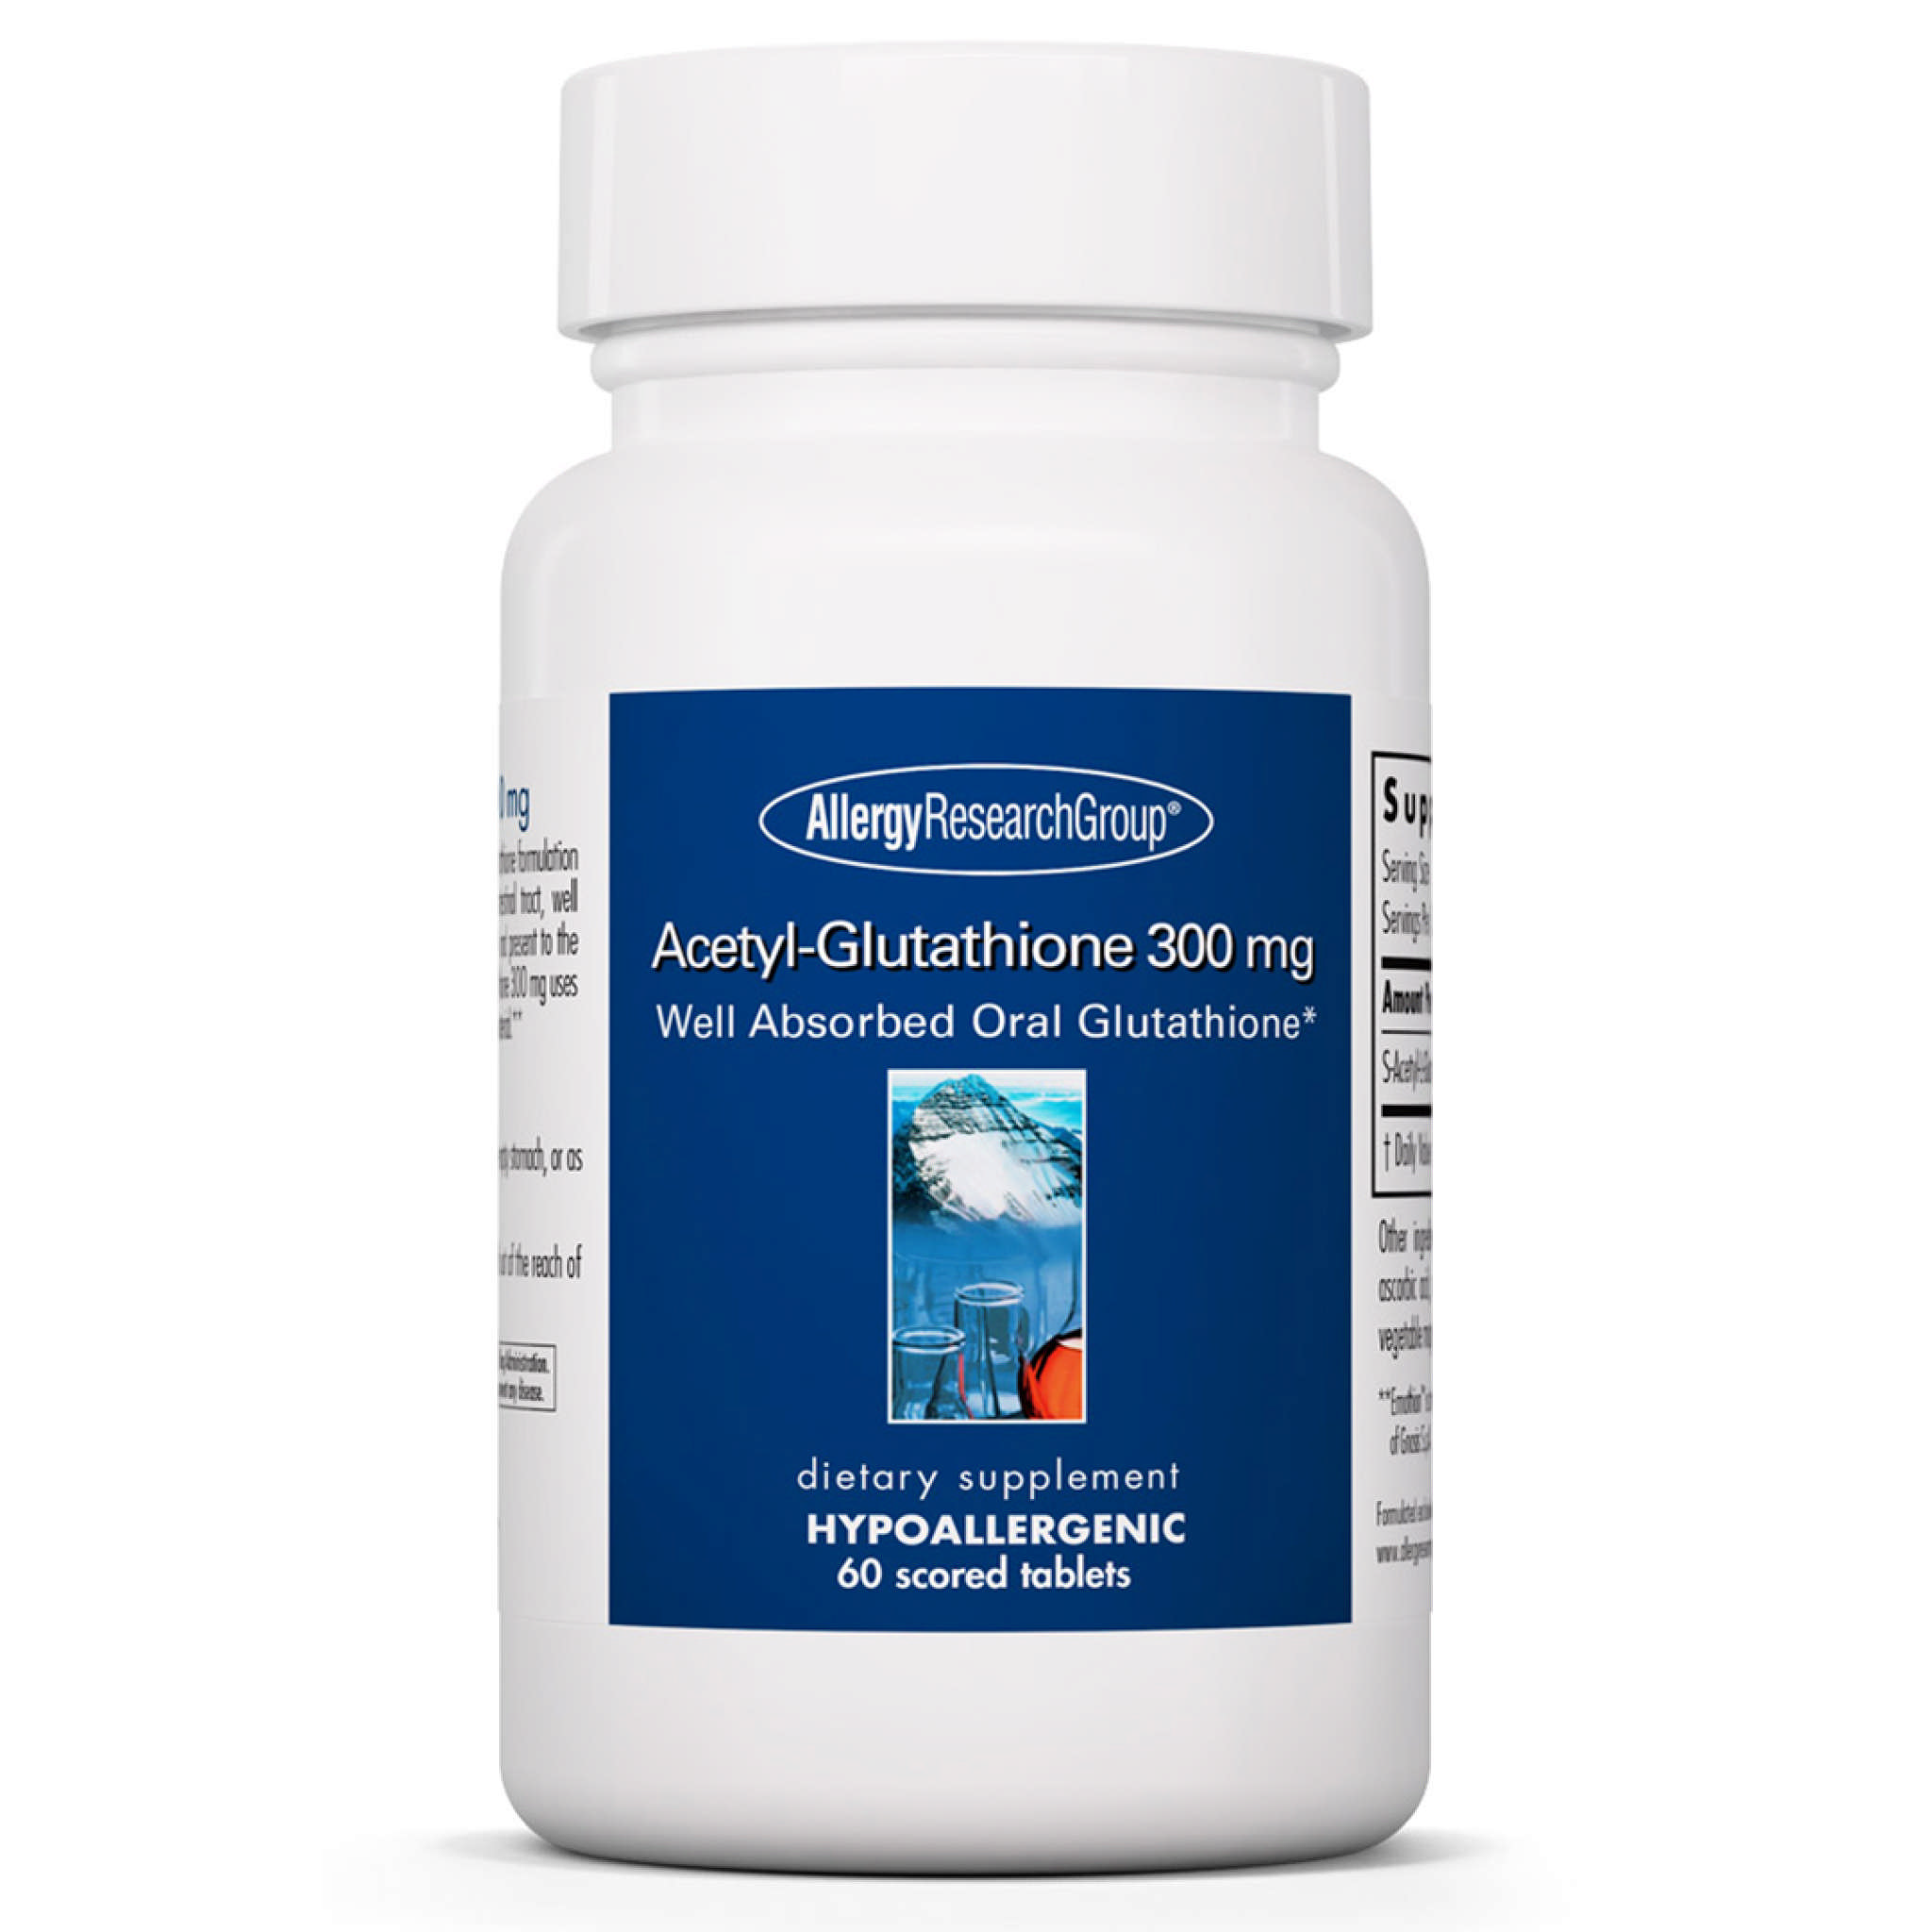 Allergy Research Group - Acetyl Glutathione 300 mg